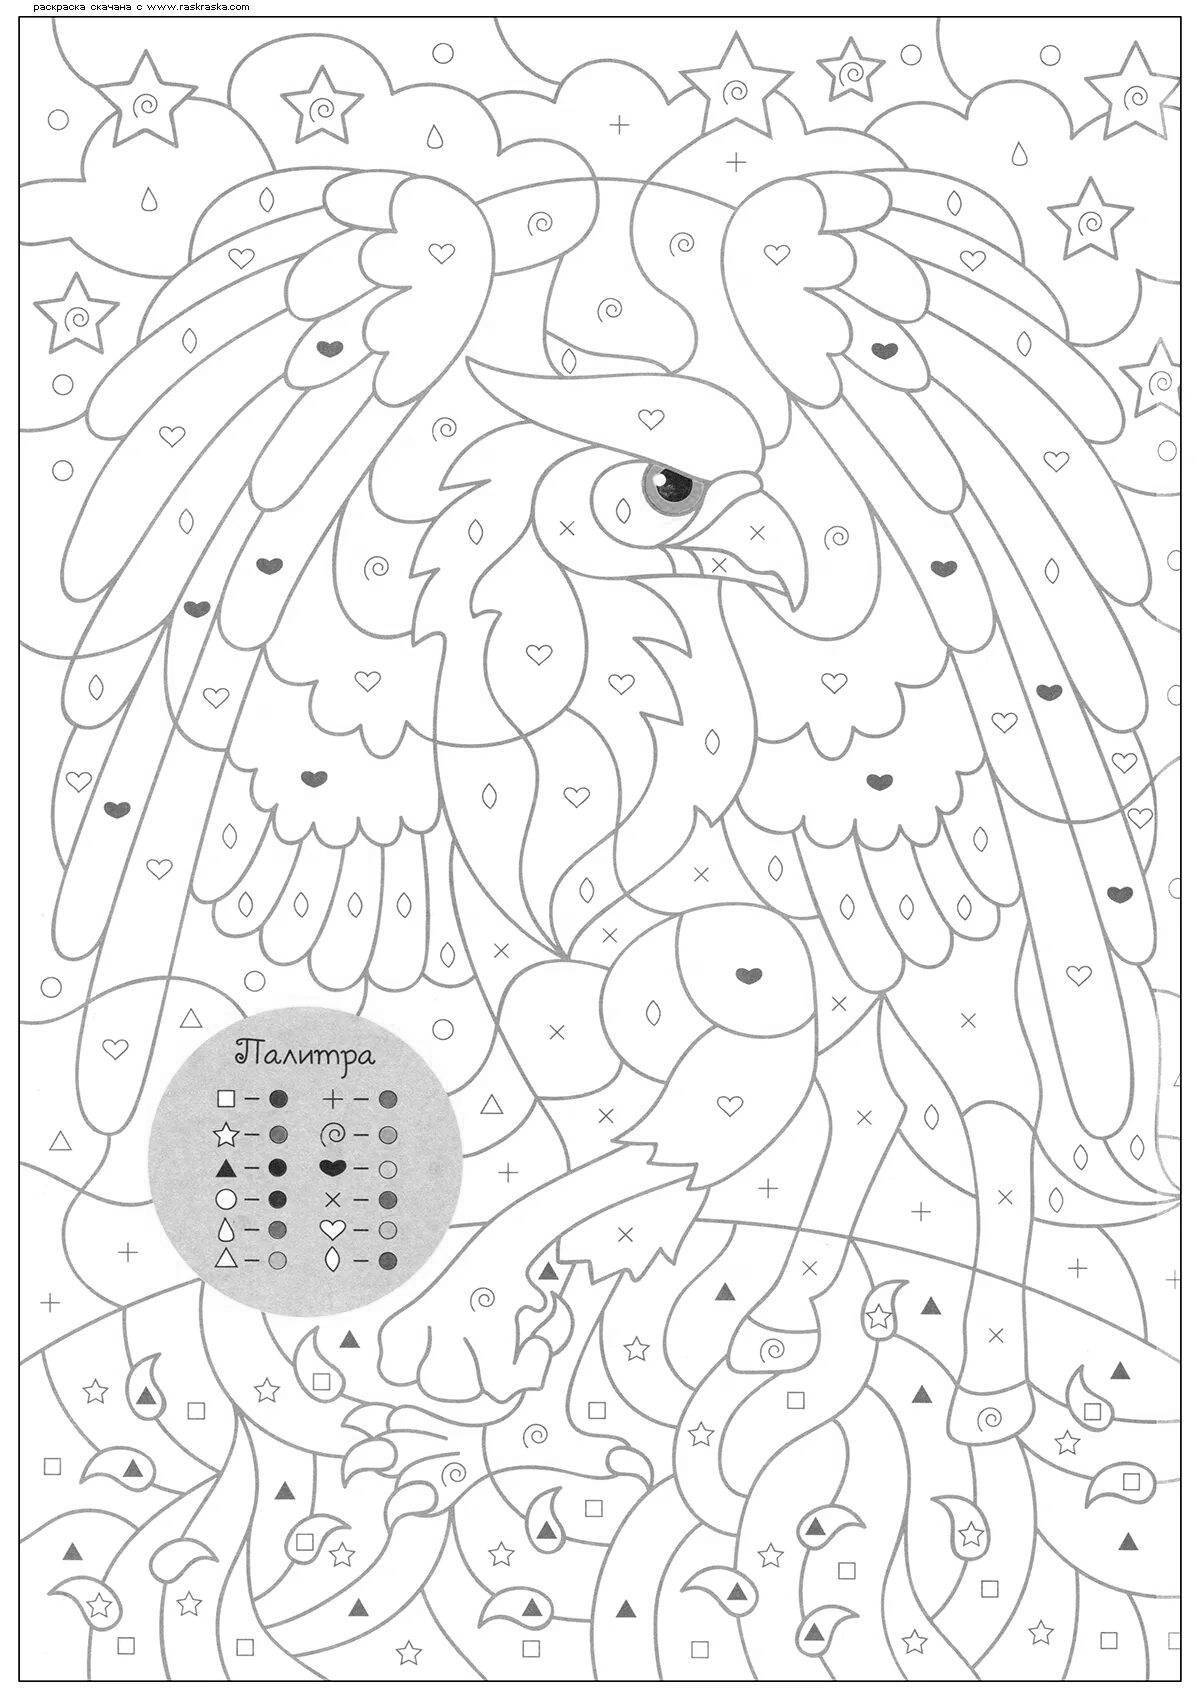 Colour coloring book from symbols for kids